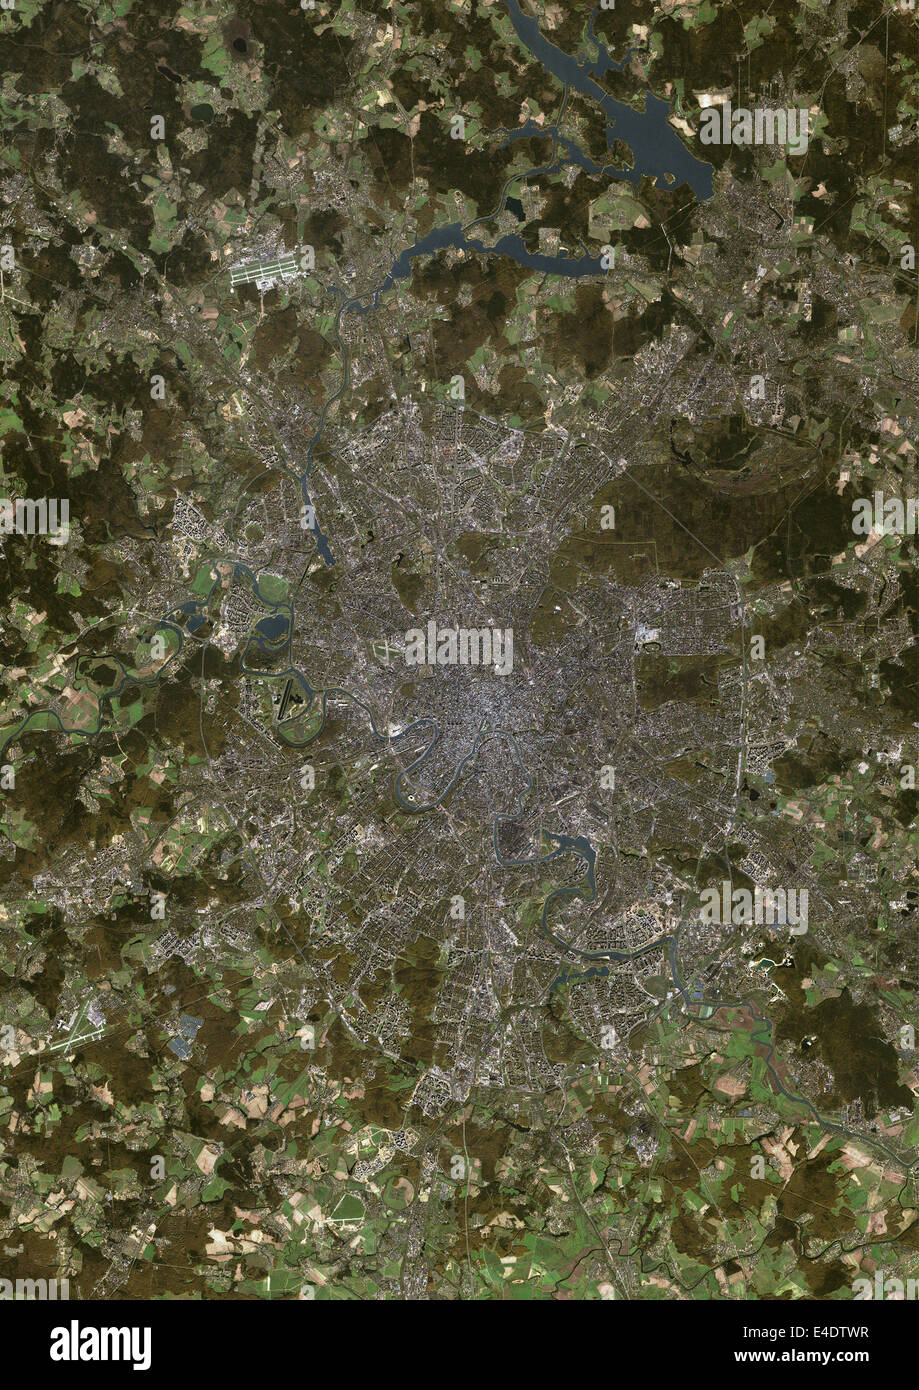 Moscow, Russia, True Colour Satellite Image. Moscow, Russia. True colour satellite image of Moscow, the capital city of Russia. Stock Photo